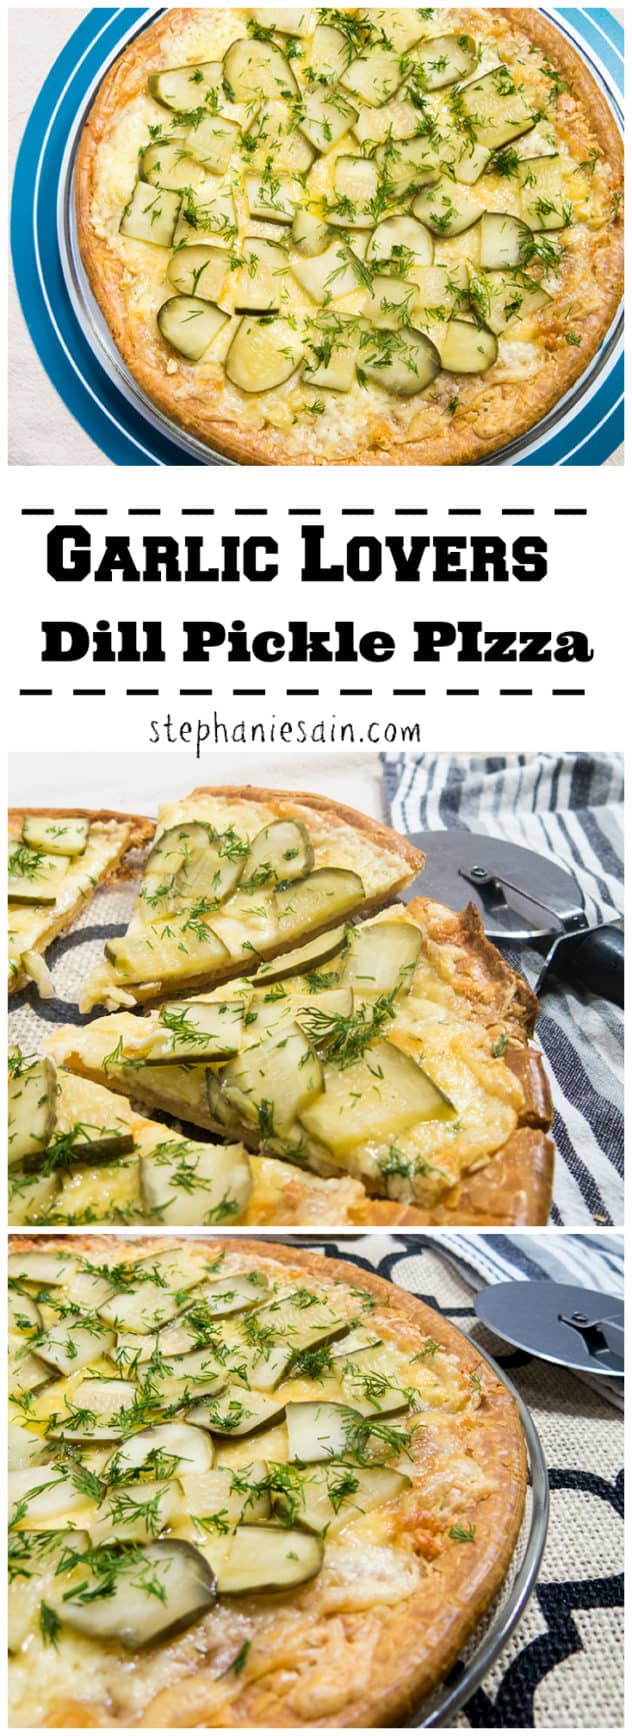 Garlic Lovers Dill Pickle Pizza is loaded with fresh garlic, dill pickles and cheese. All topped on a gluten free crust for the perfect easy tasty dinner. Vegetarian and Gluten Free.